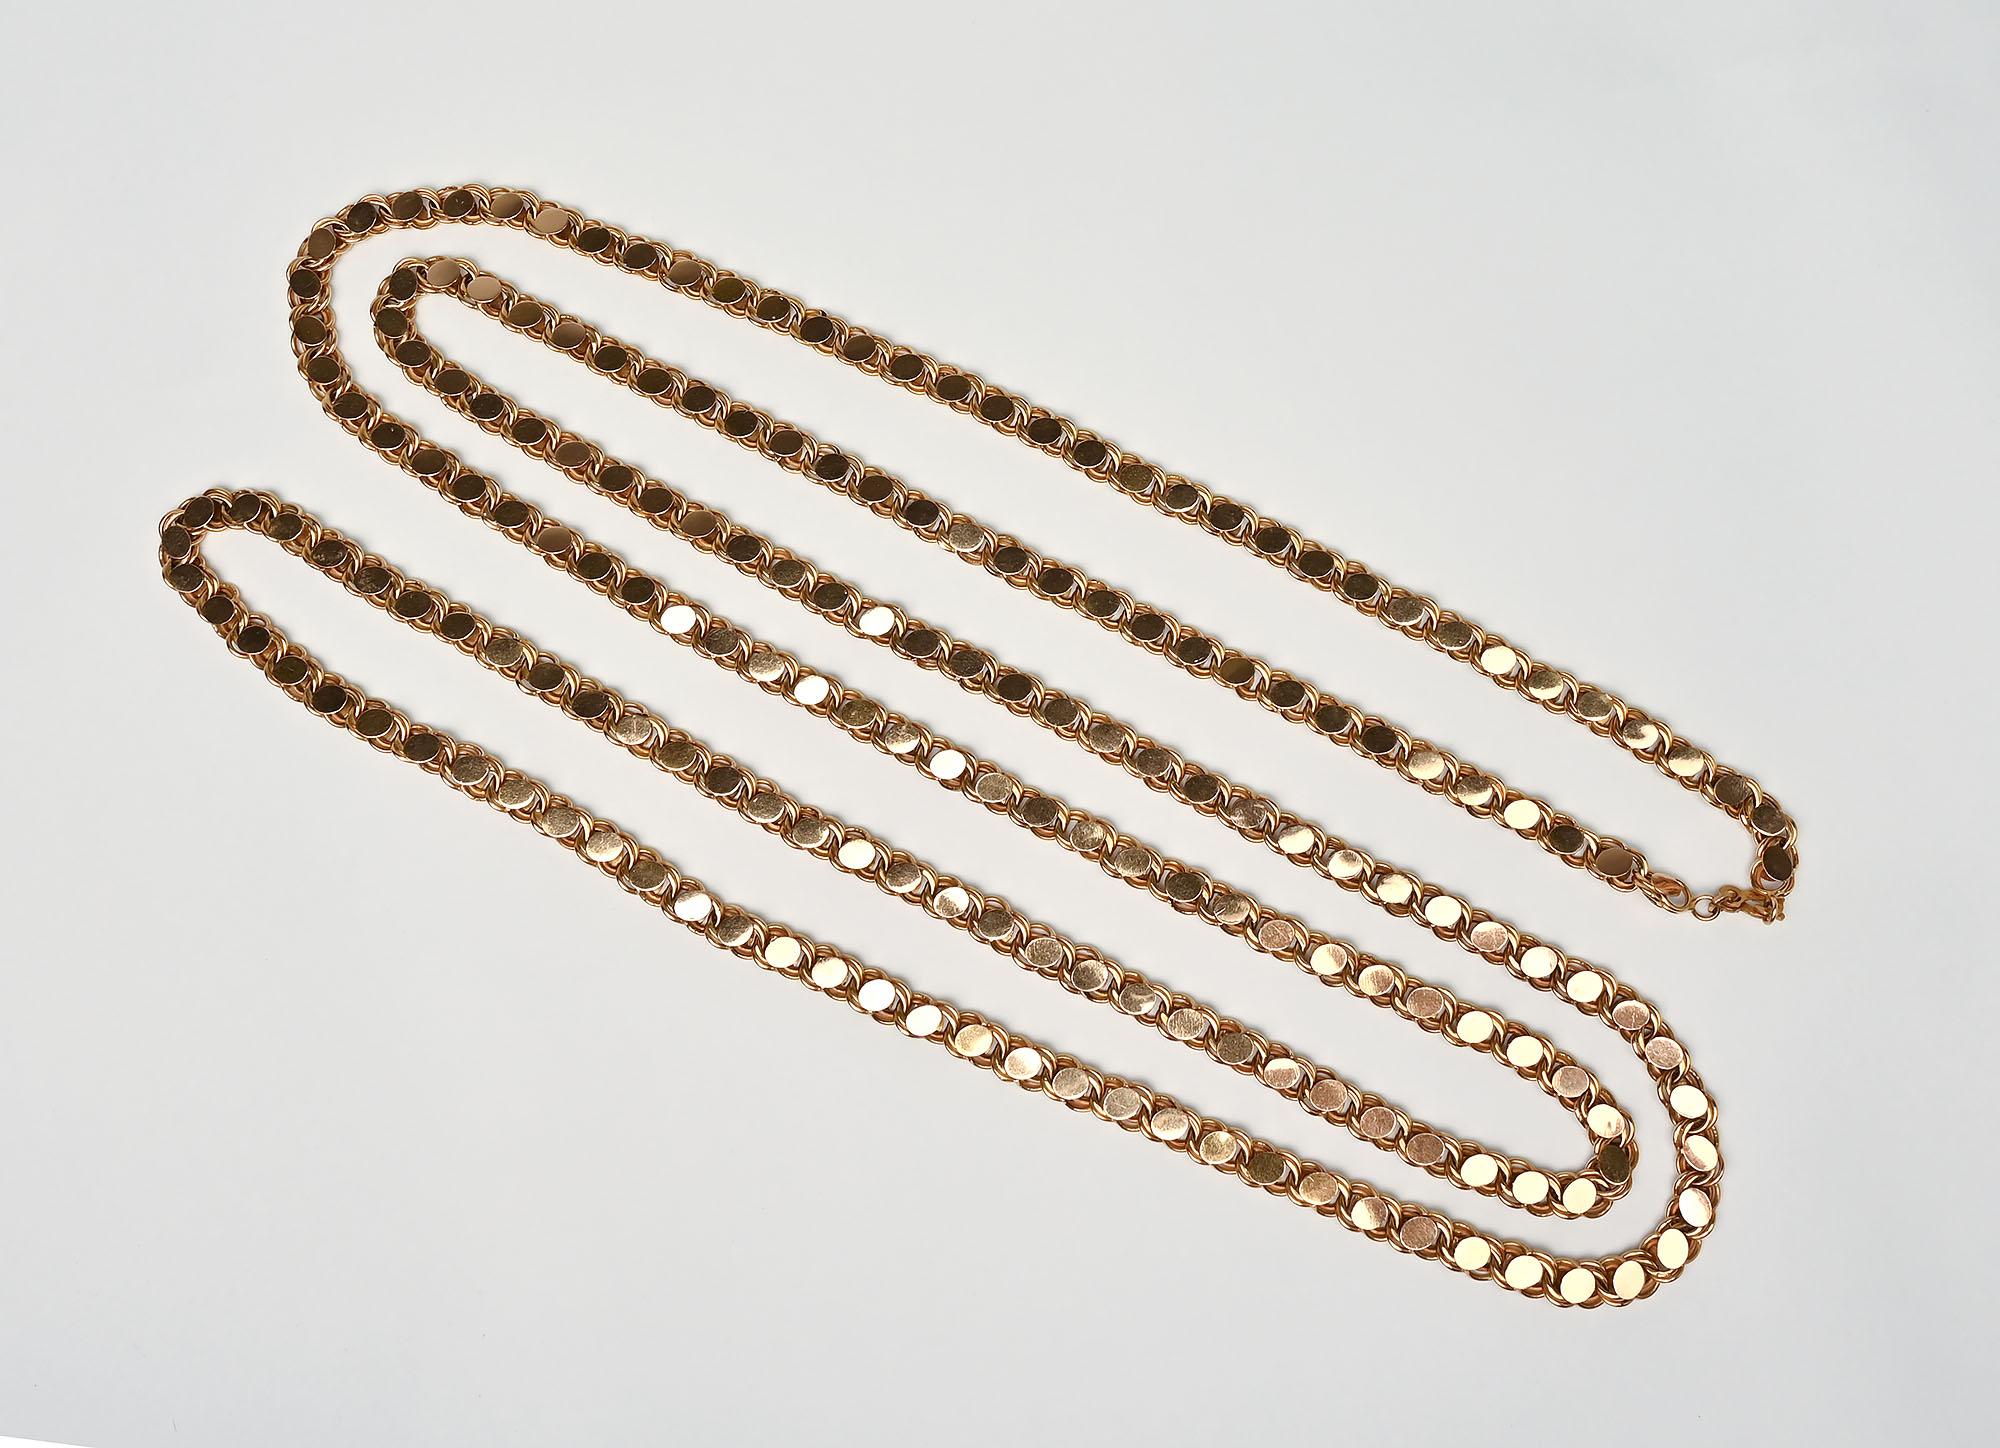 This 19 karat gold handmade gold can be worn in a variety of ways It is long enough to be wrapped around the neck two; three or four times. It can also be tied as a lariat. The necklace is a richly colored gold. It does not have a clasp.
The links